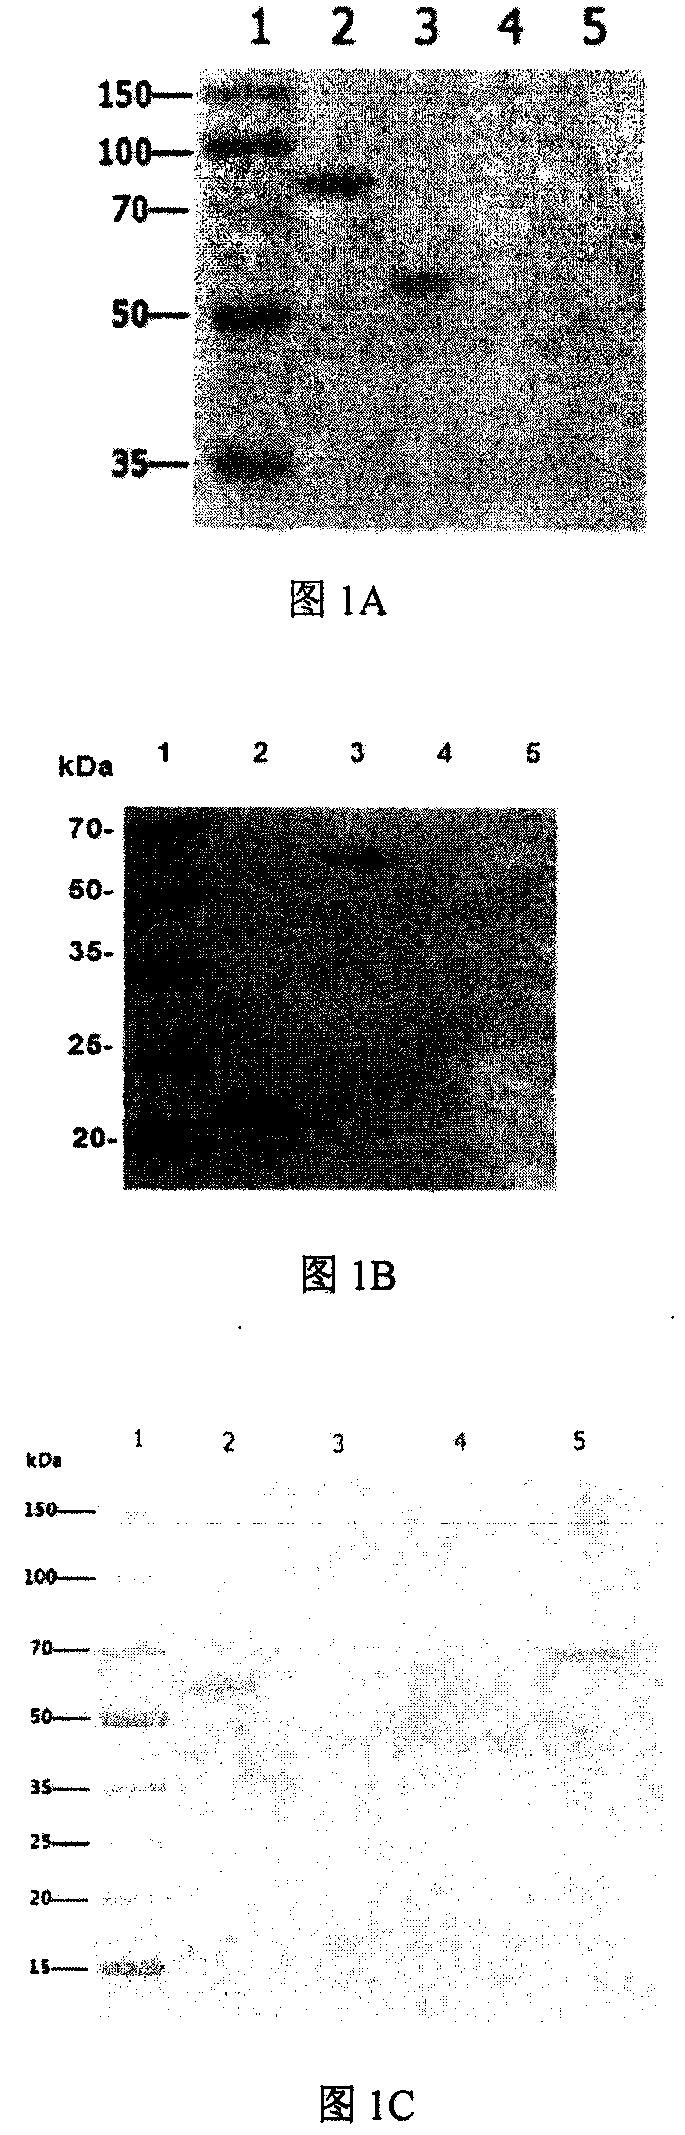 Linear 23 peptide capable of coupling single B cell epitope or hapten to prepare immunomodulating peptide and antibody and application thereof